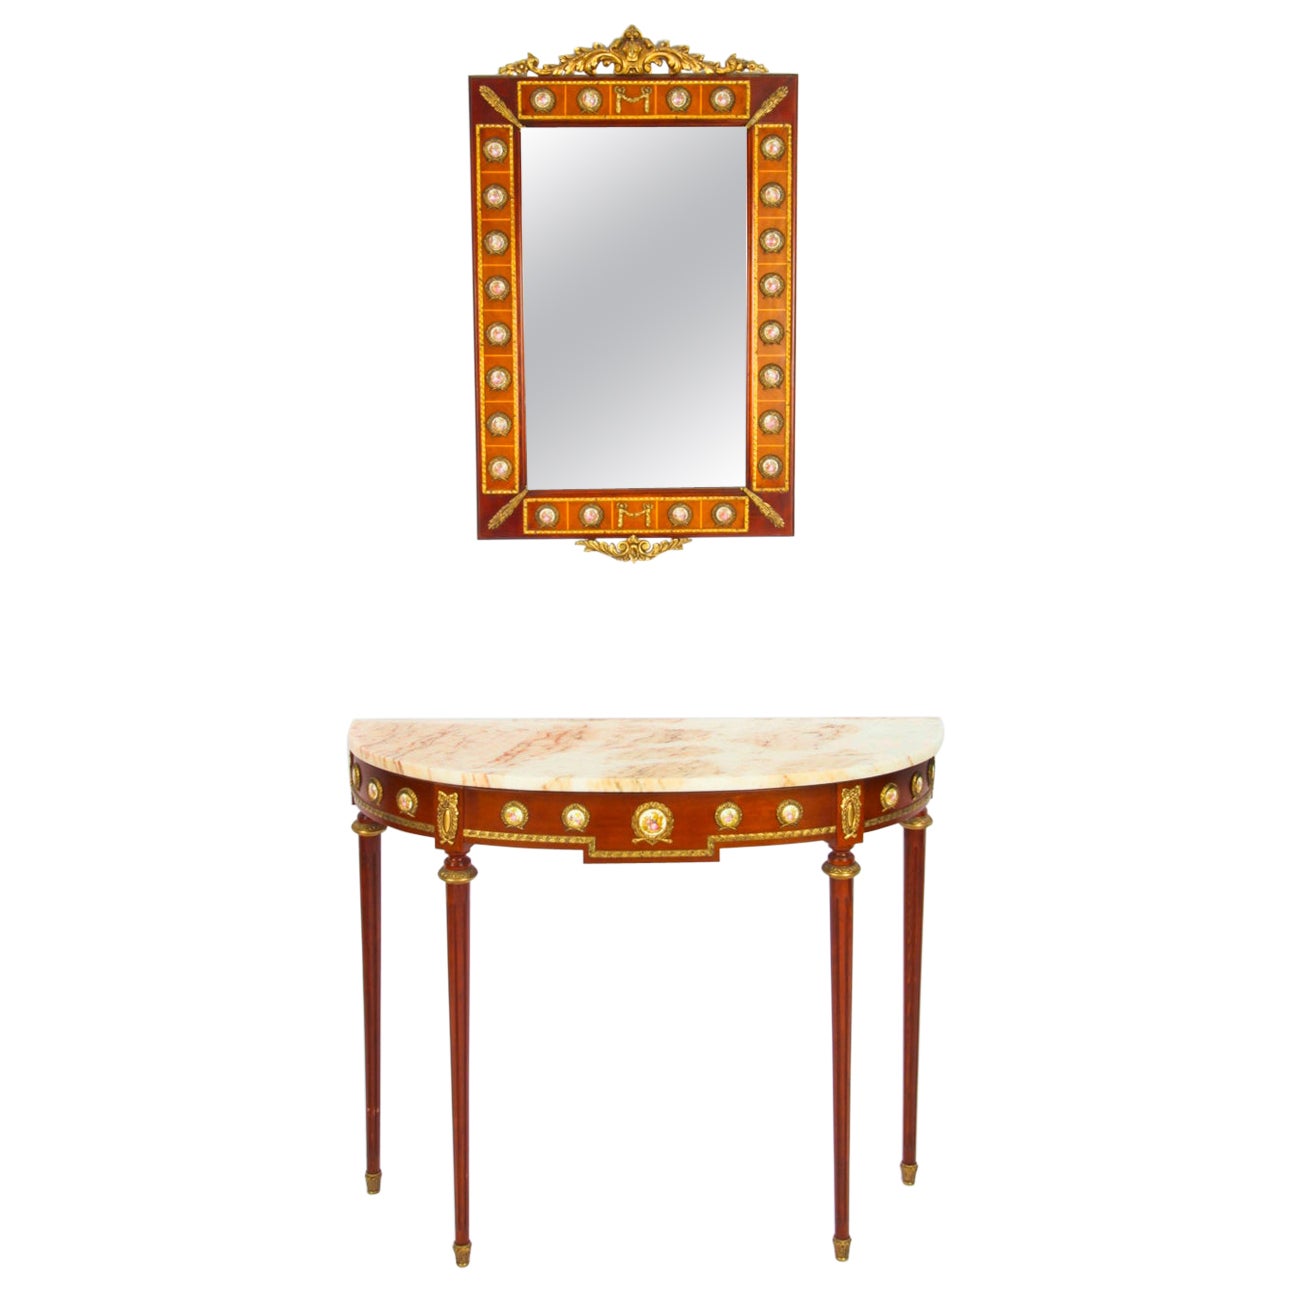 Vintage Ormolu & Porcelain Mounted Console Table & Mirror by Epstein 20th C